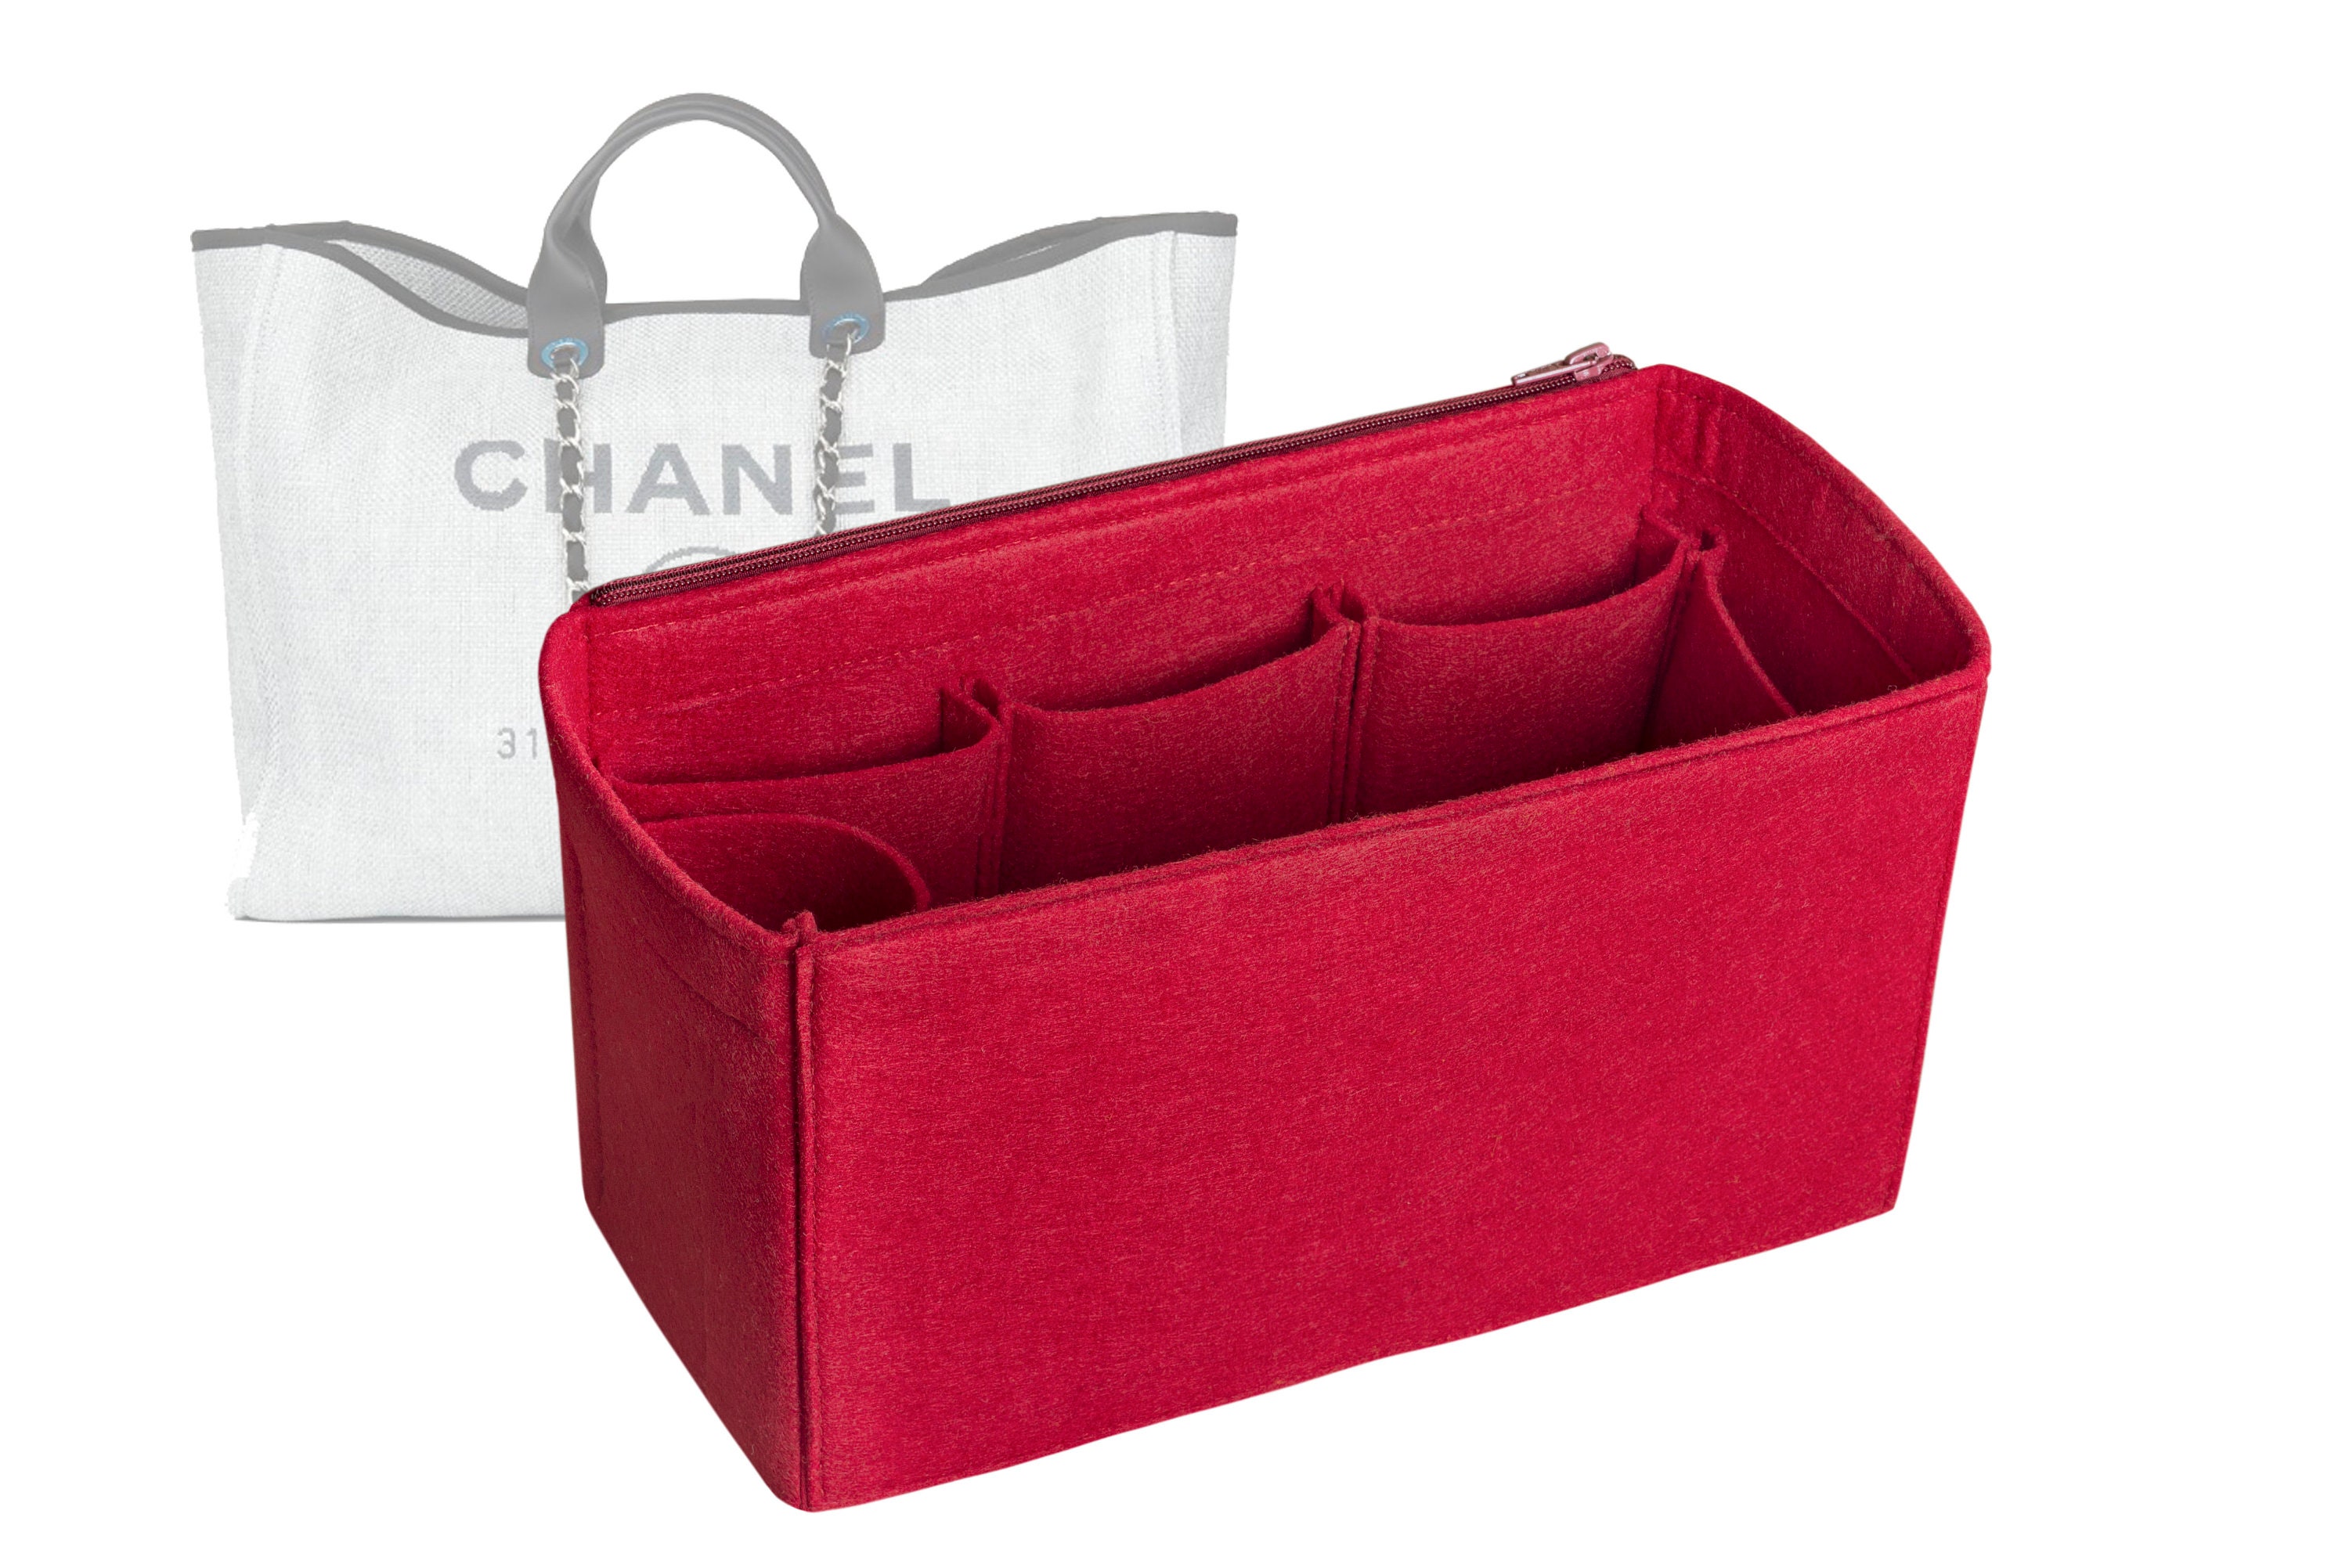 Chanel Deauville Canvas Tote Organizer Insert, Bag Organizer with Double  Bottle and Pen Holders